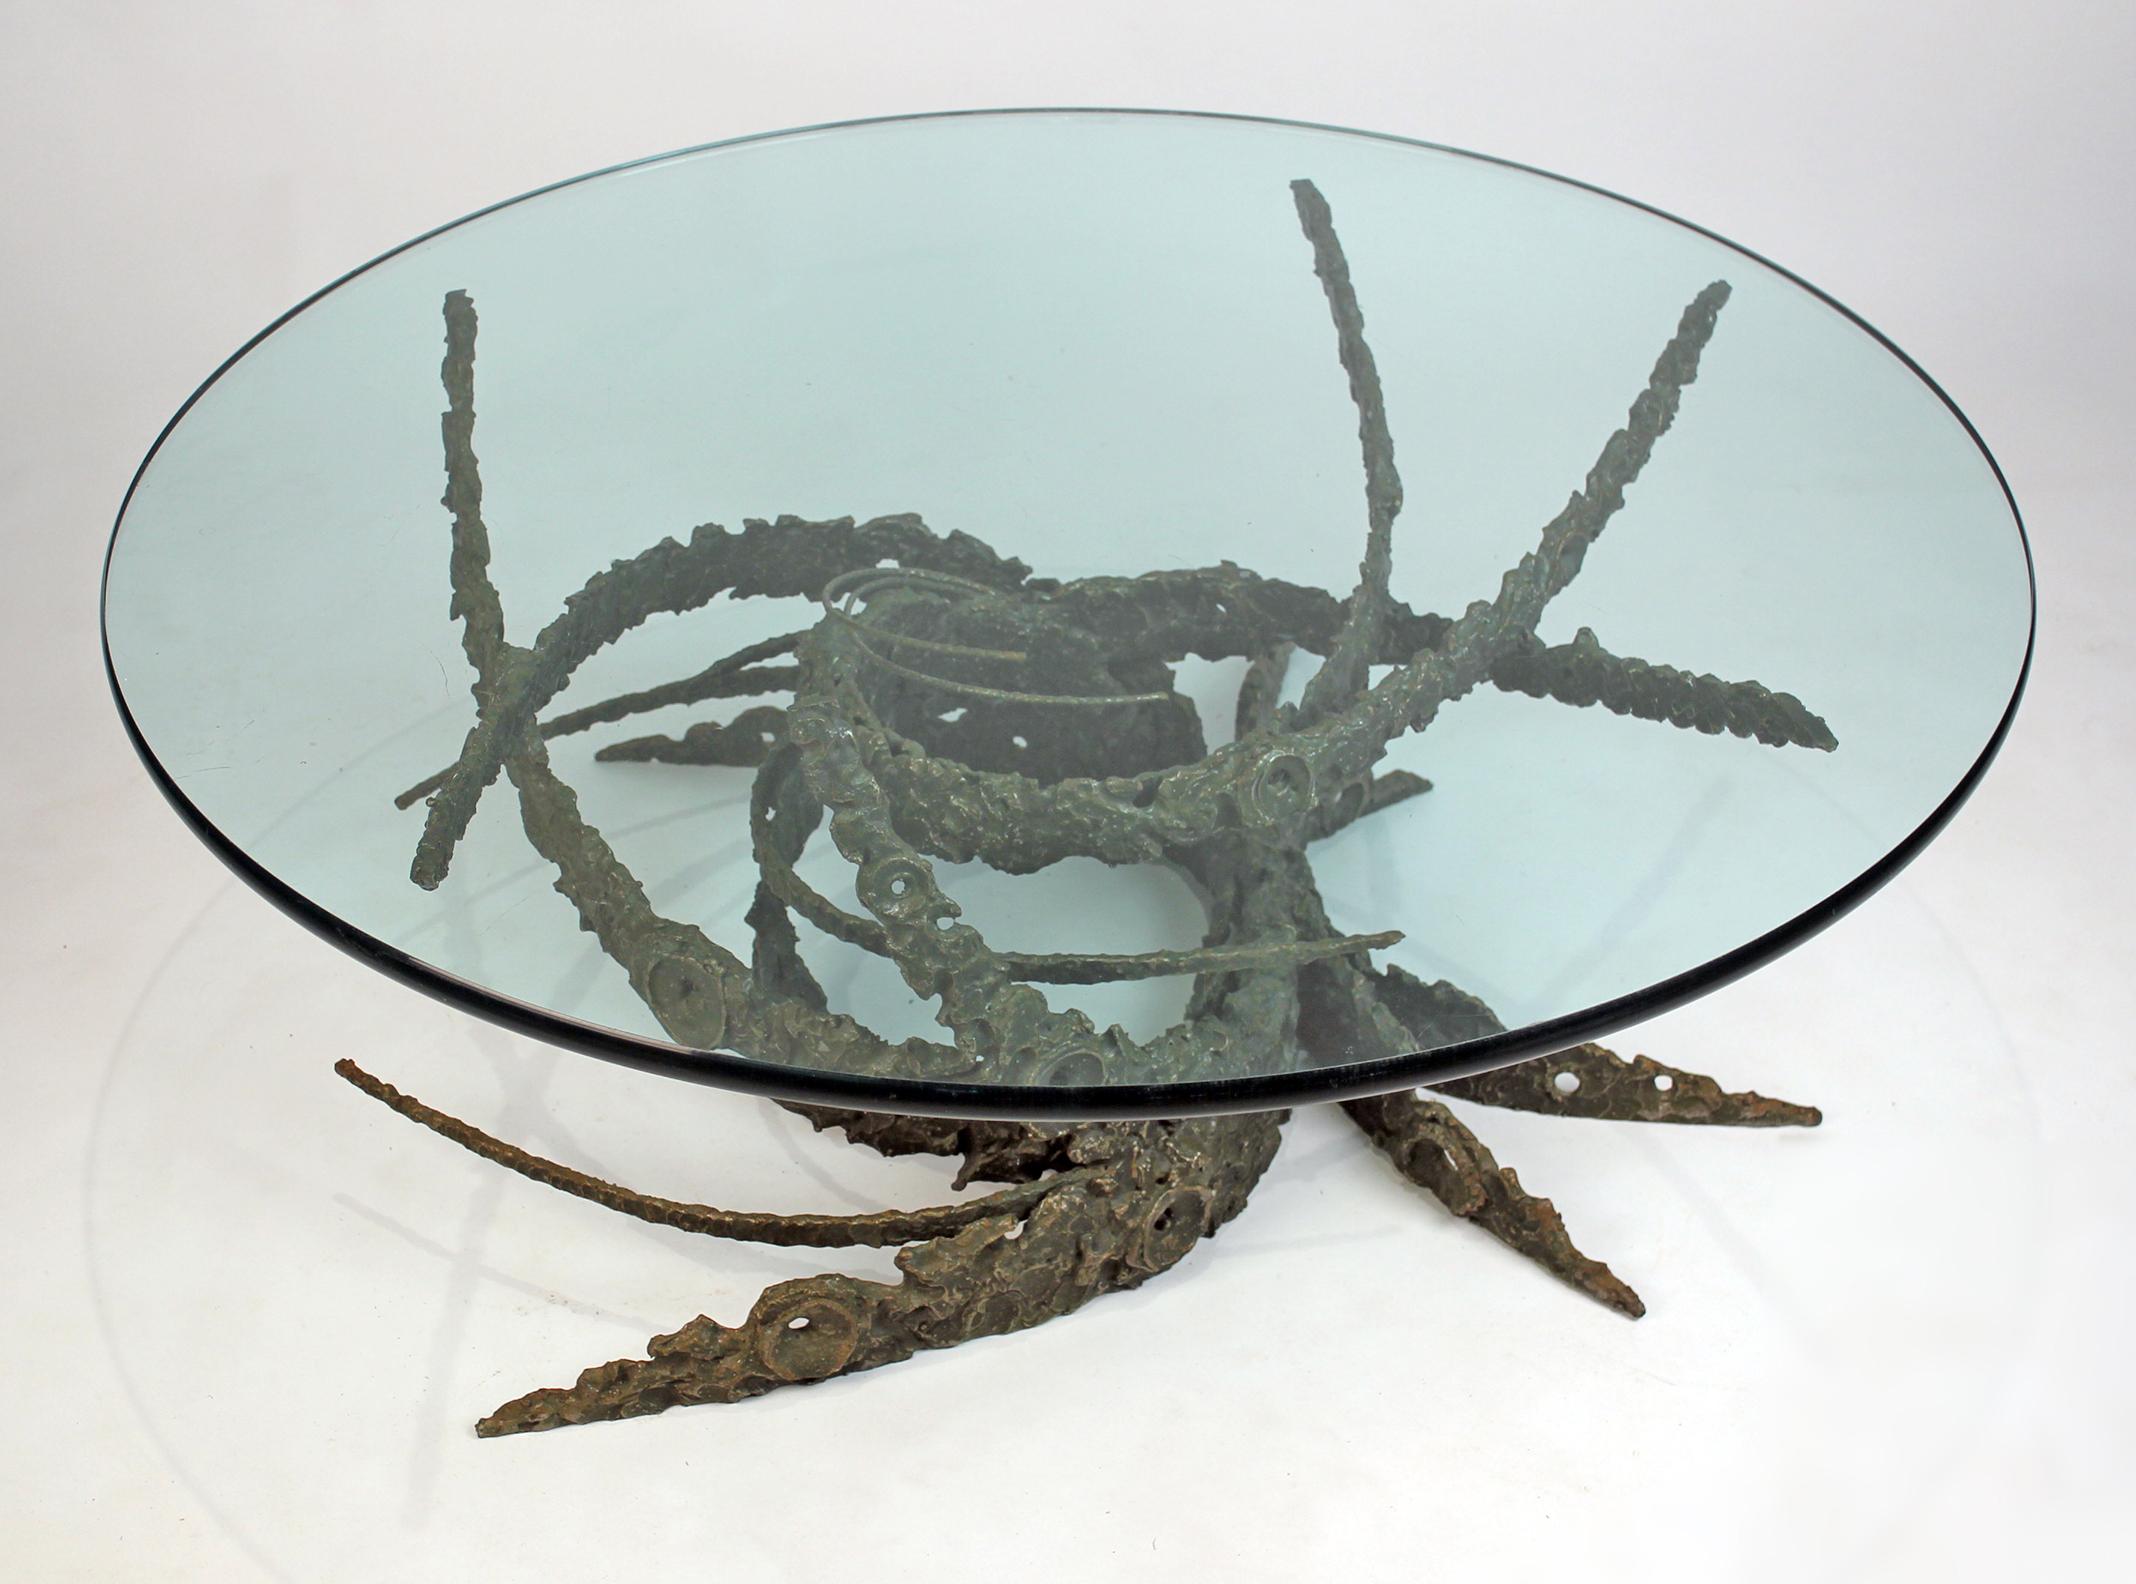 Early and dare Daniel Gluck table from his 'swirl' series. Sculpted solid cast bronze base with circular glass top. There were many imitations of this piece created over the years but the surface treatment of the originals is easily recognized. It